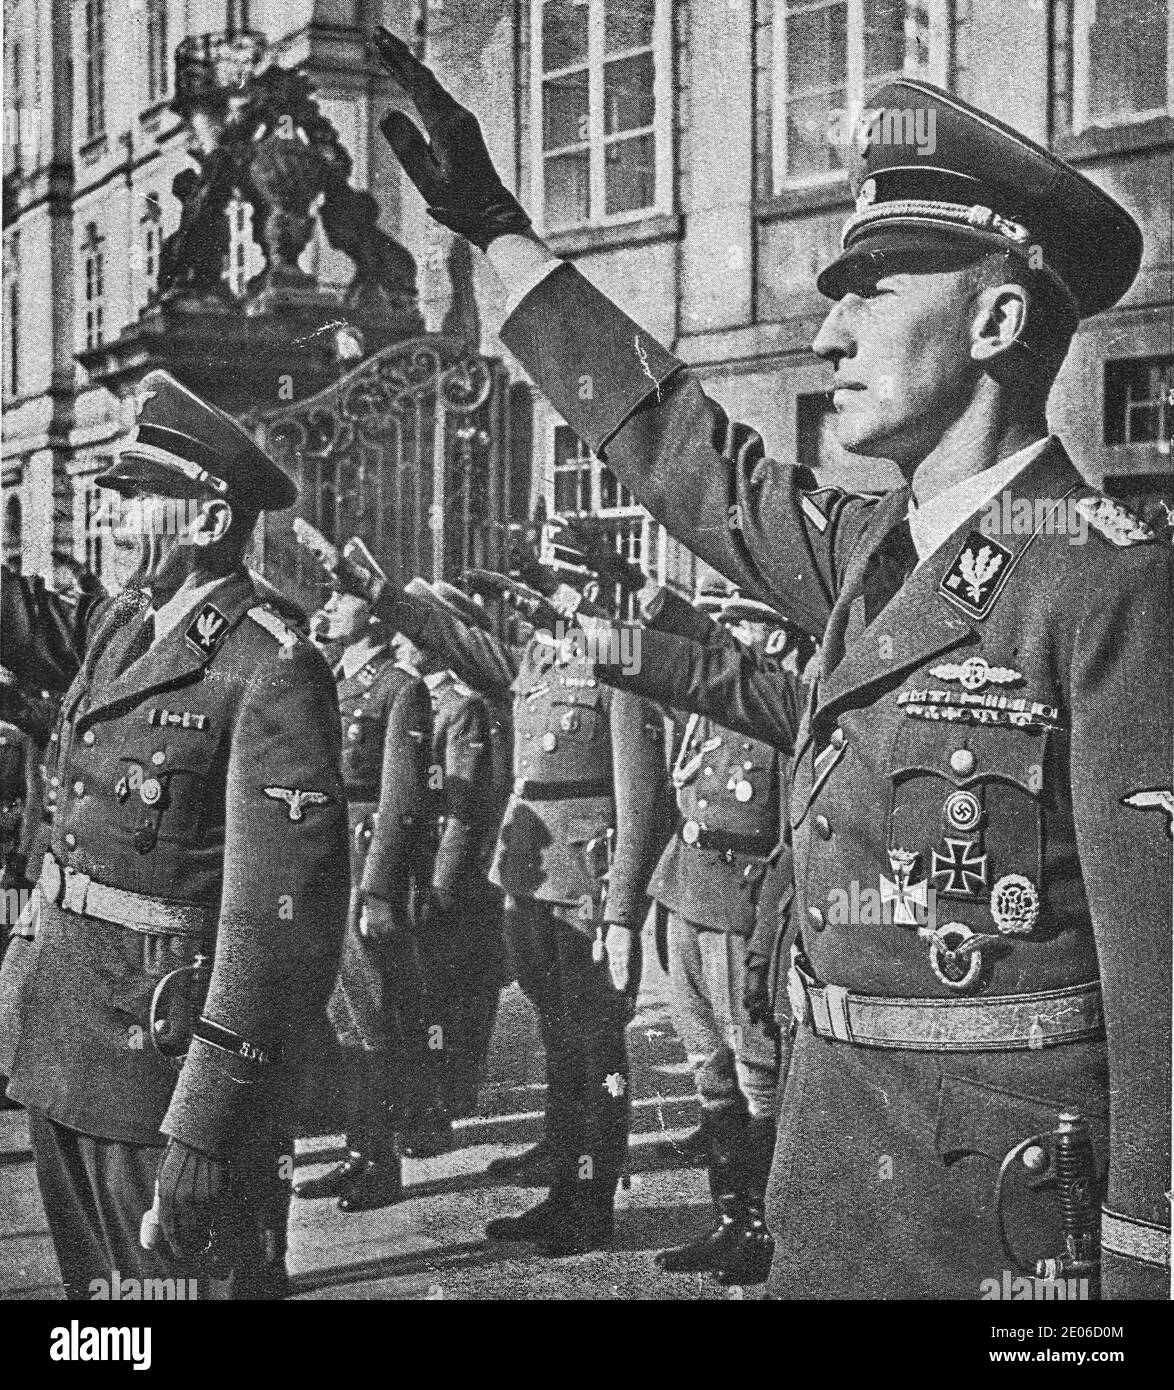 PRAGUE, PROTECTORATE OF BOHEMIA AND MORAVIA - SEPTEMBER 28, 1941: Reinhard Heydrich (right) and K.H. Frank at Prague castle. Nazis salute. Stock Photo